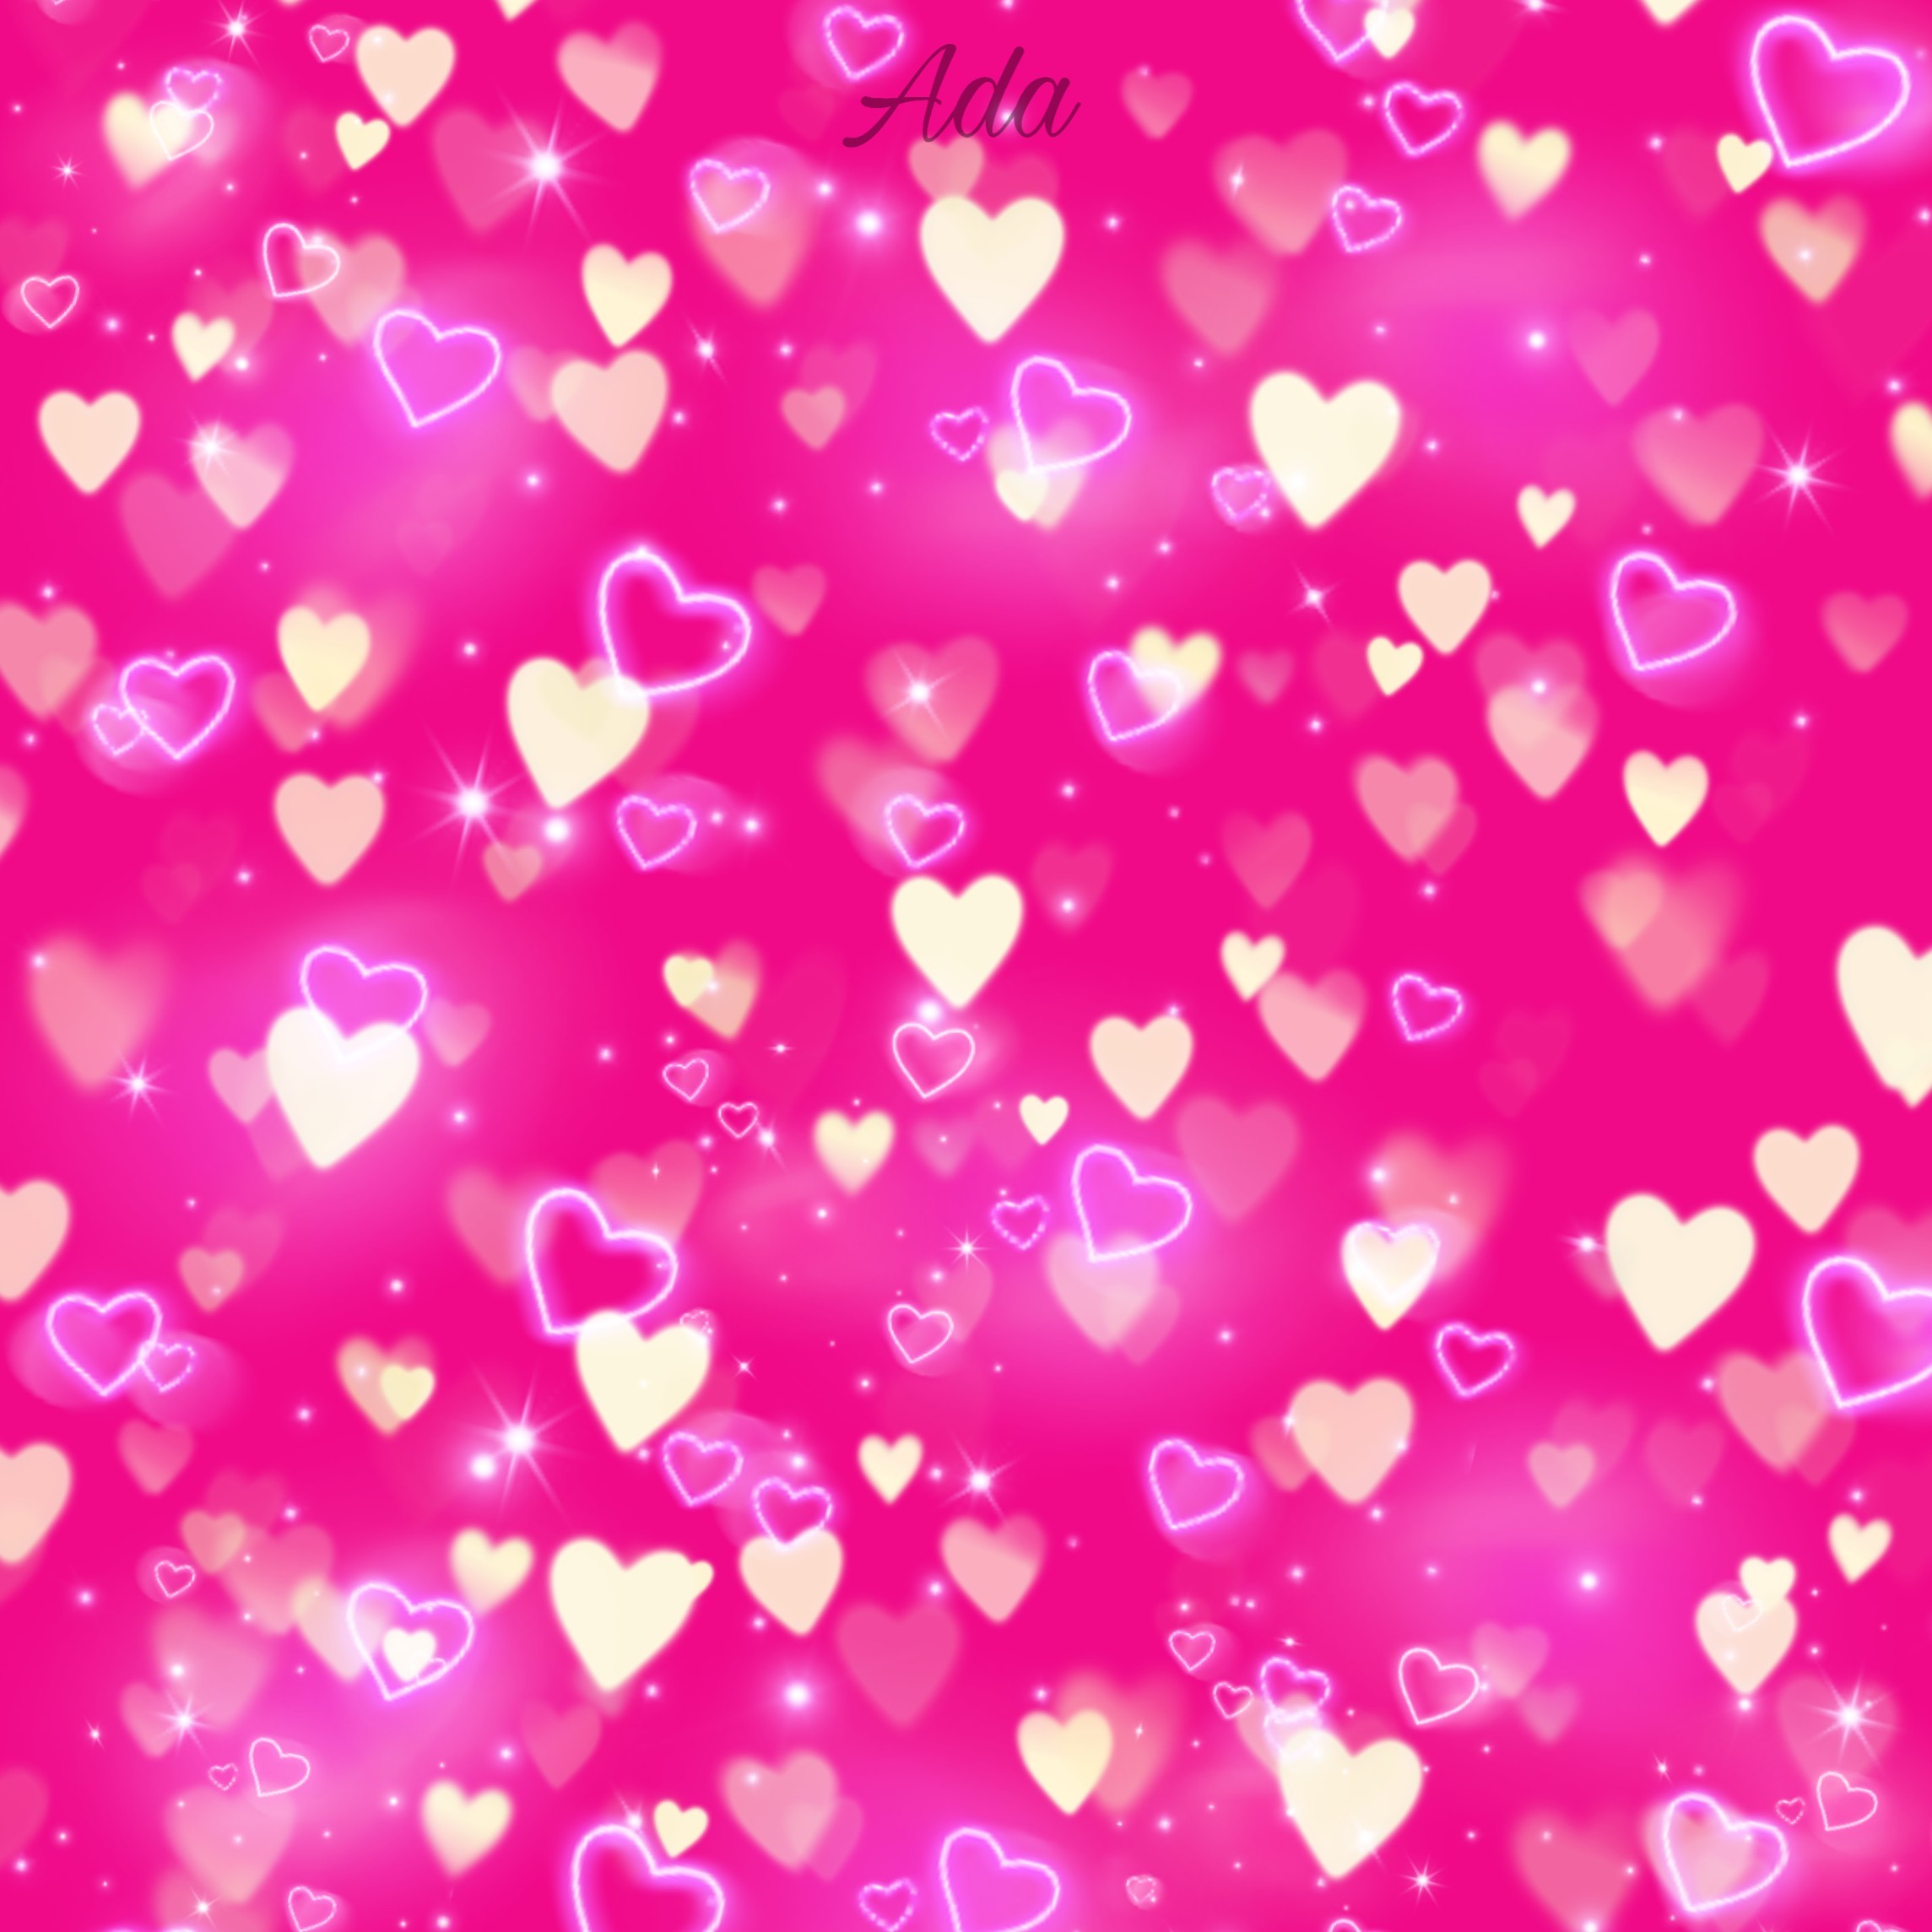 Free Valentine's Day Wallpaper and Background